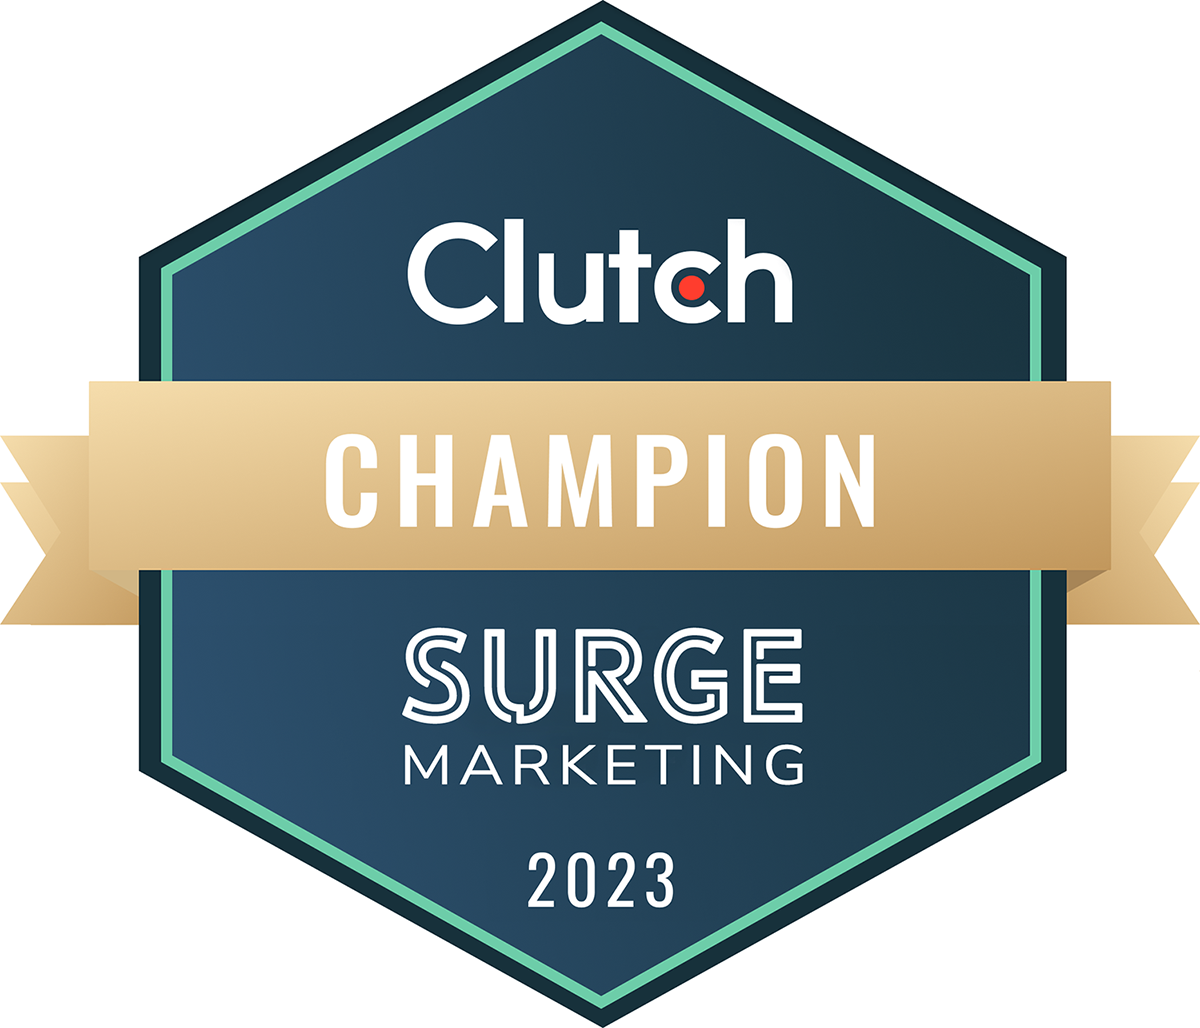 Surge Marketing Honored as a Clutch Champion for 2023